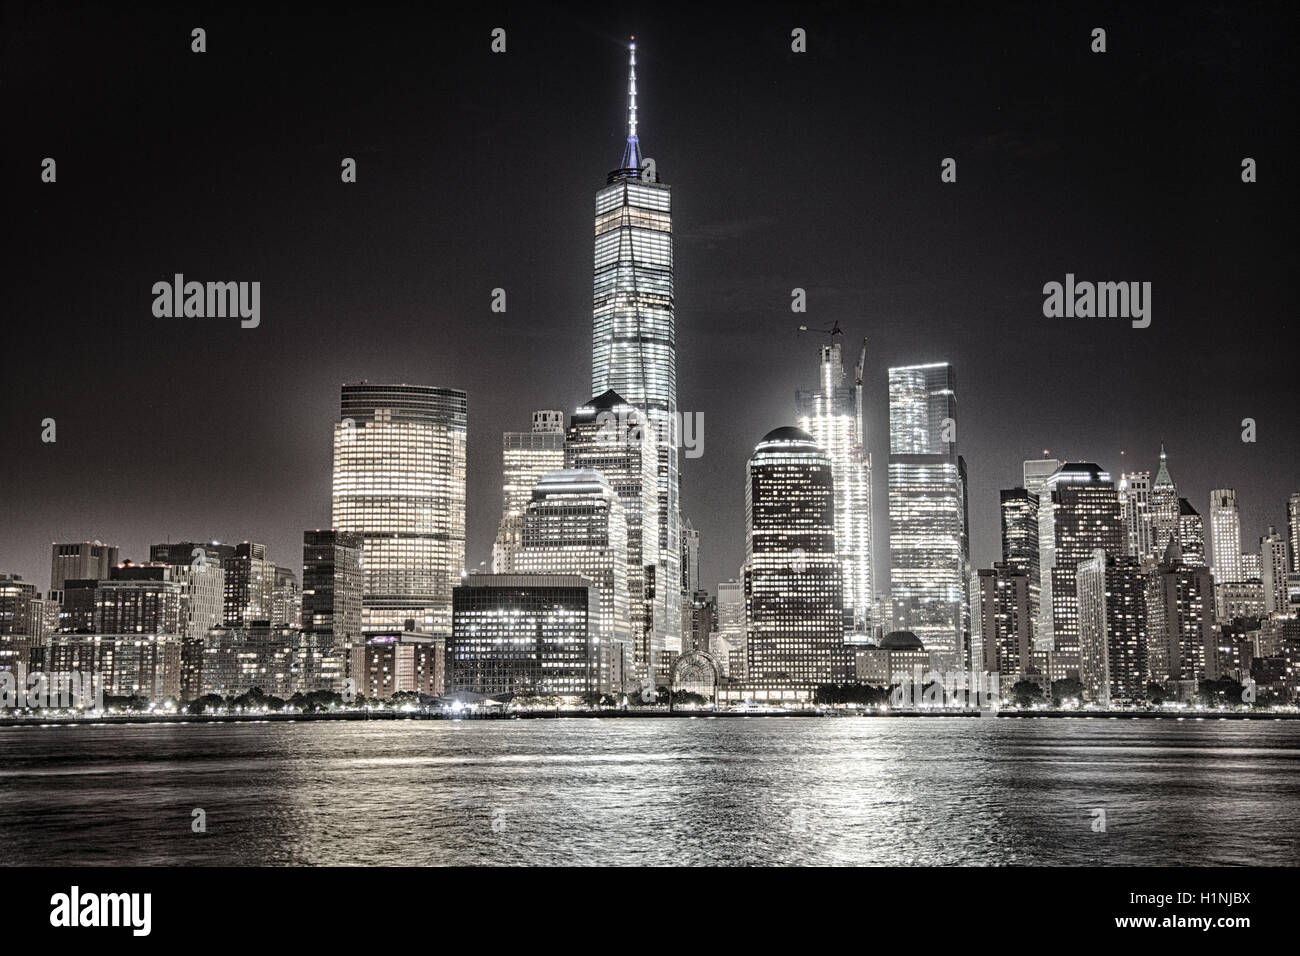 New York City, New York, USA, August 12, 2016: The FInancial district skyline of New York City as seen from Jersey City, NJ. Stock Photo